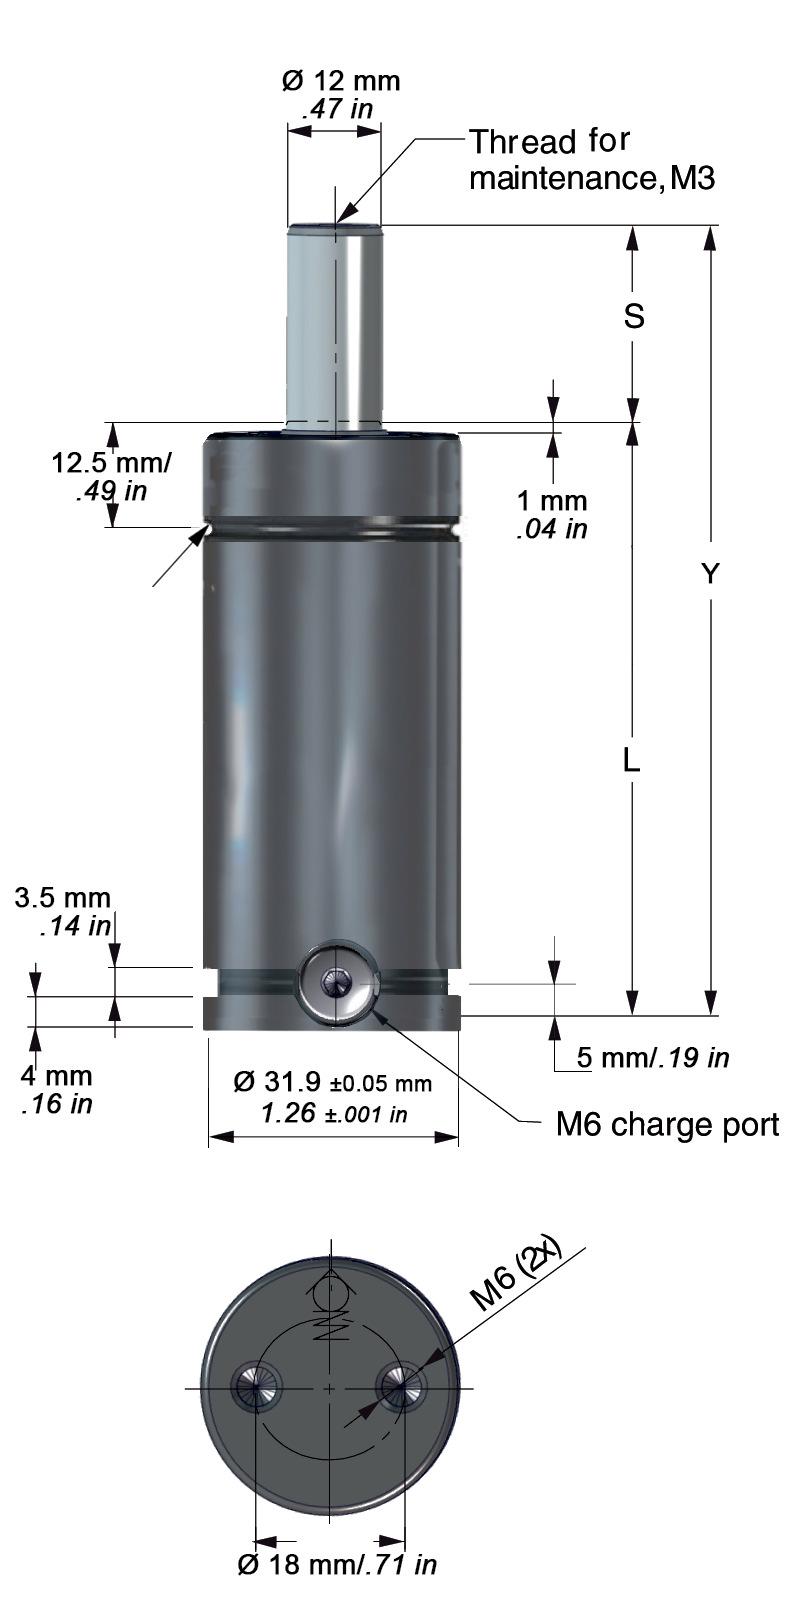 T2-200 Mini Nitrogen Gas Springs Overstroke Protec on Product Specifica ons Pressure Medium... Nitrogen Gas Max. Charging Pressure... 180 bar/2,610 psi Min. Charging Pressure... 25 bar/360 psi Opera ng Temperature.